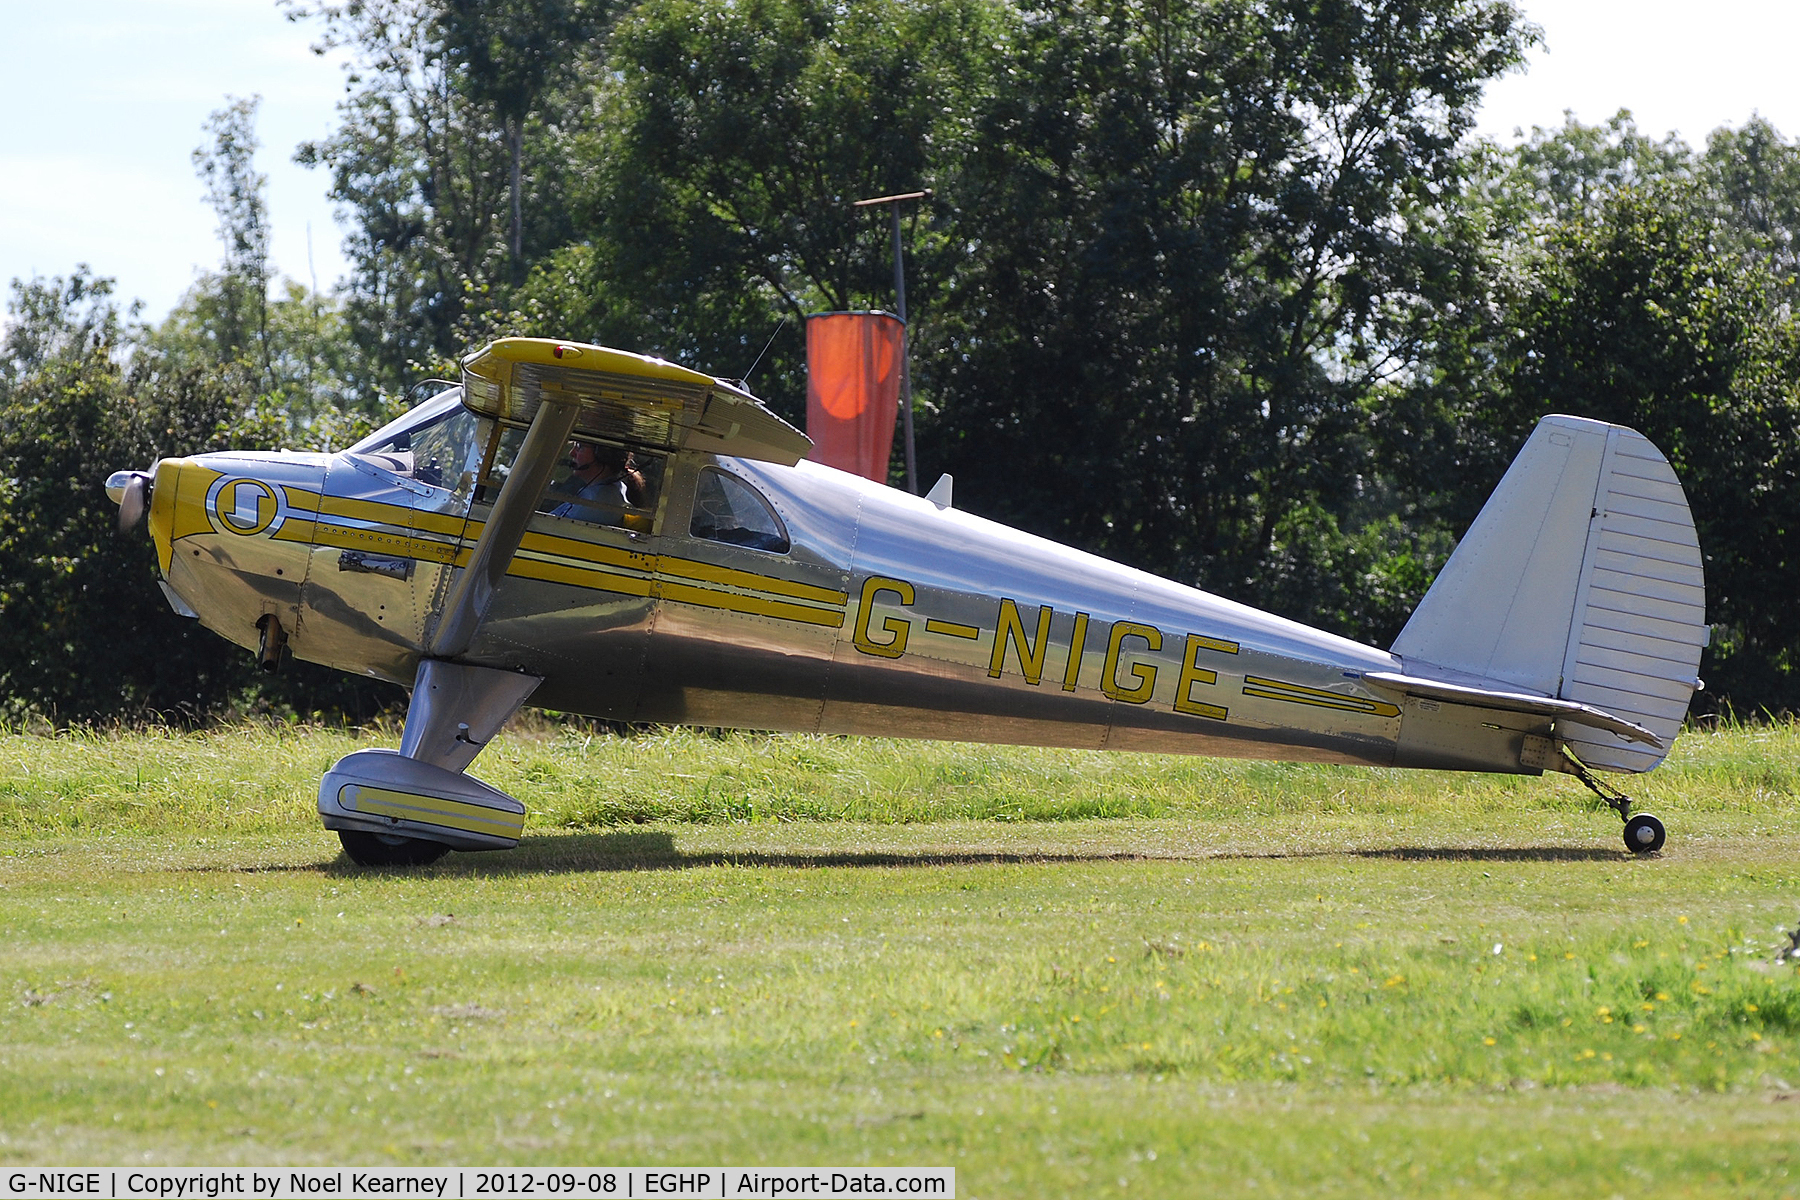 G-NIGE, 1946 Luscombe 8E Silvaire C/N 3525, Photographed at the Vintage Fly-in at Popham Airfield Sept '12